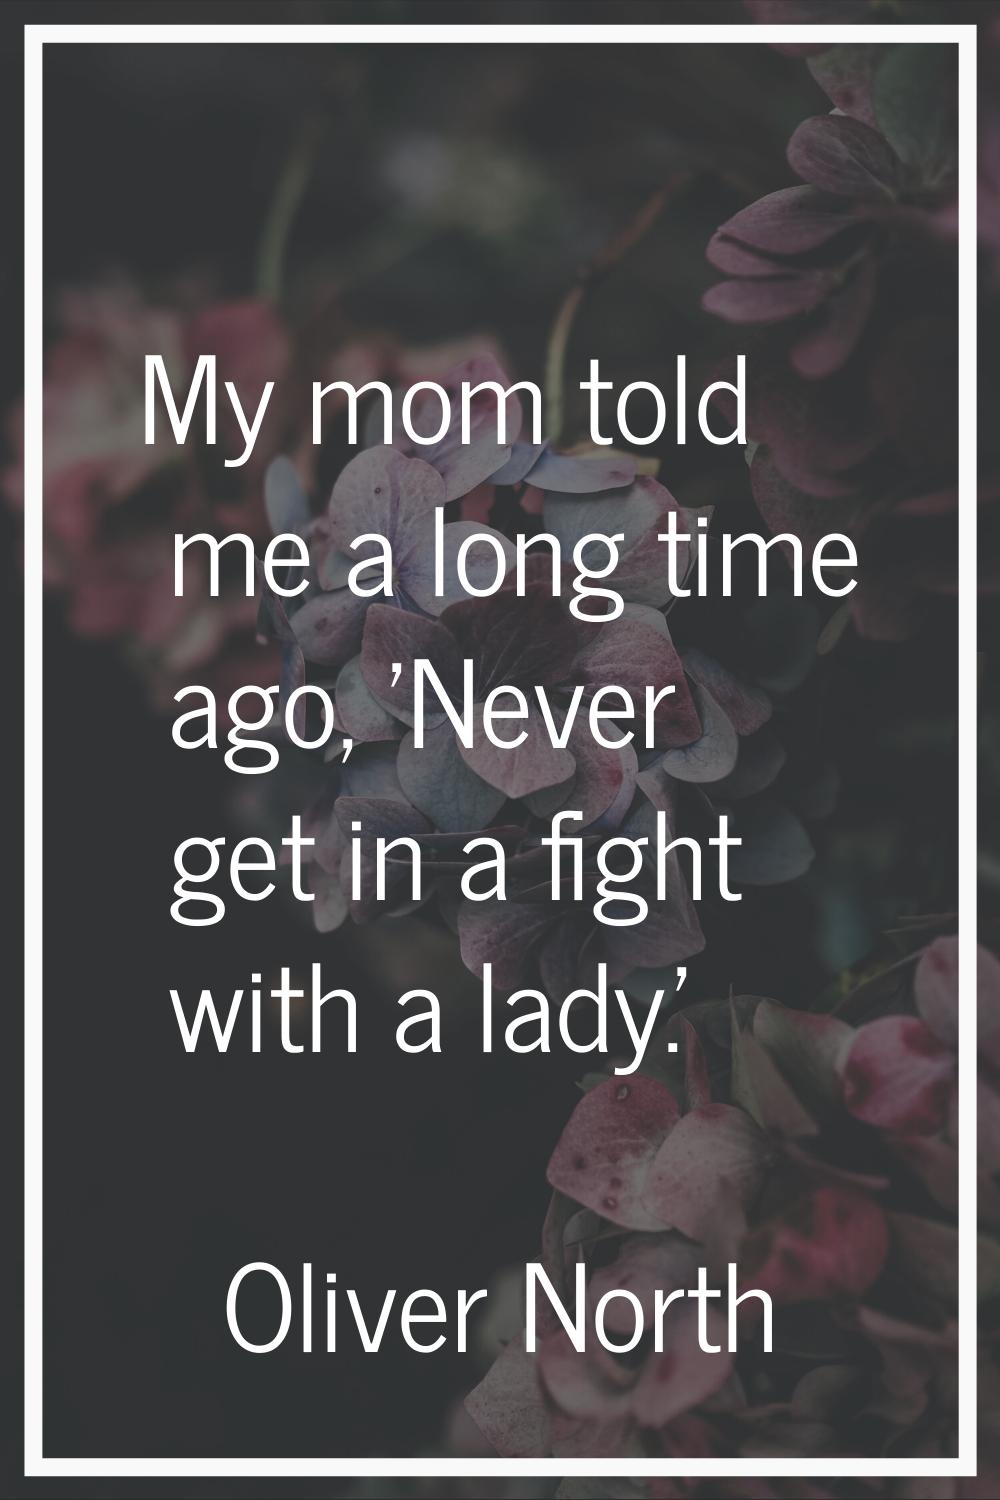 My mom told me a long time ago, 'Never get in a fight with a lady.'